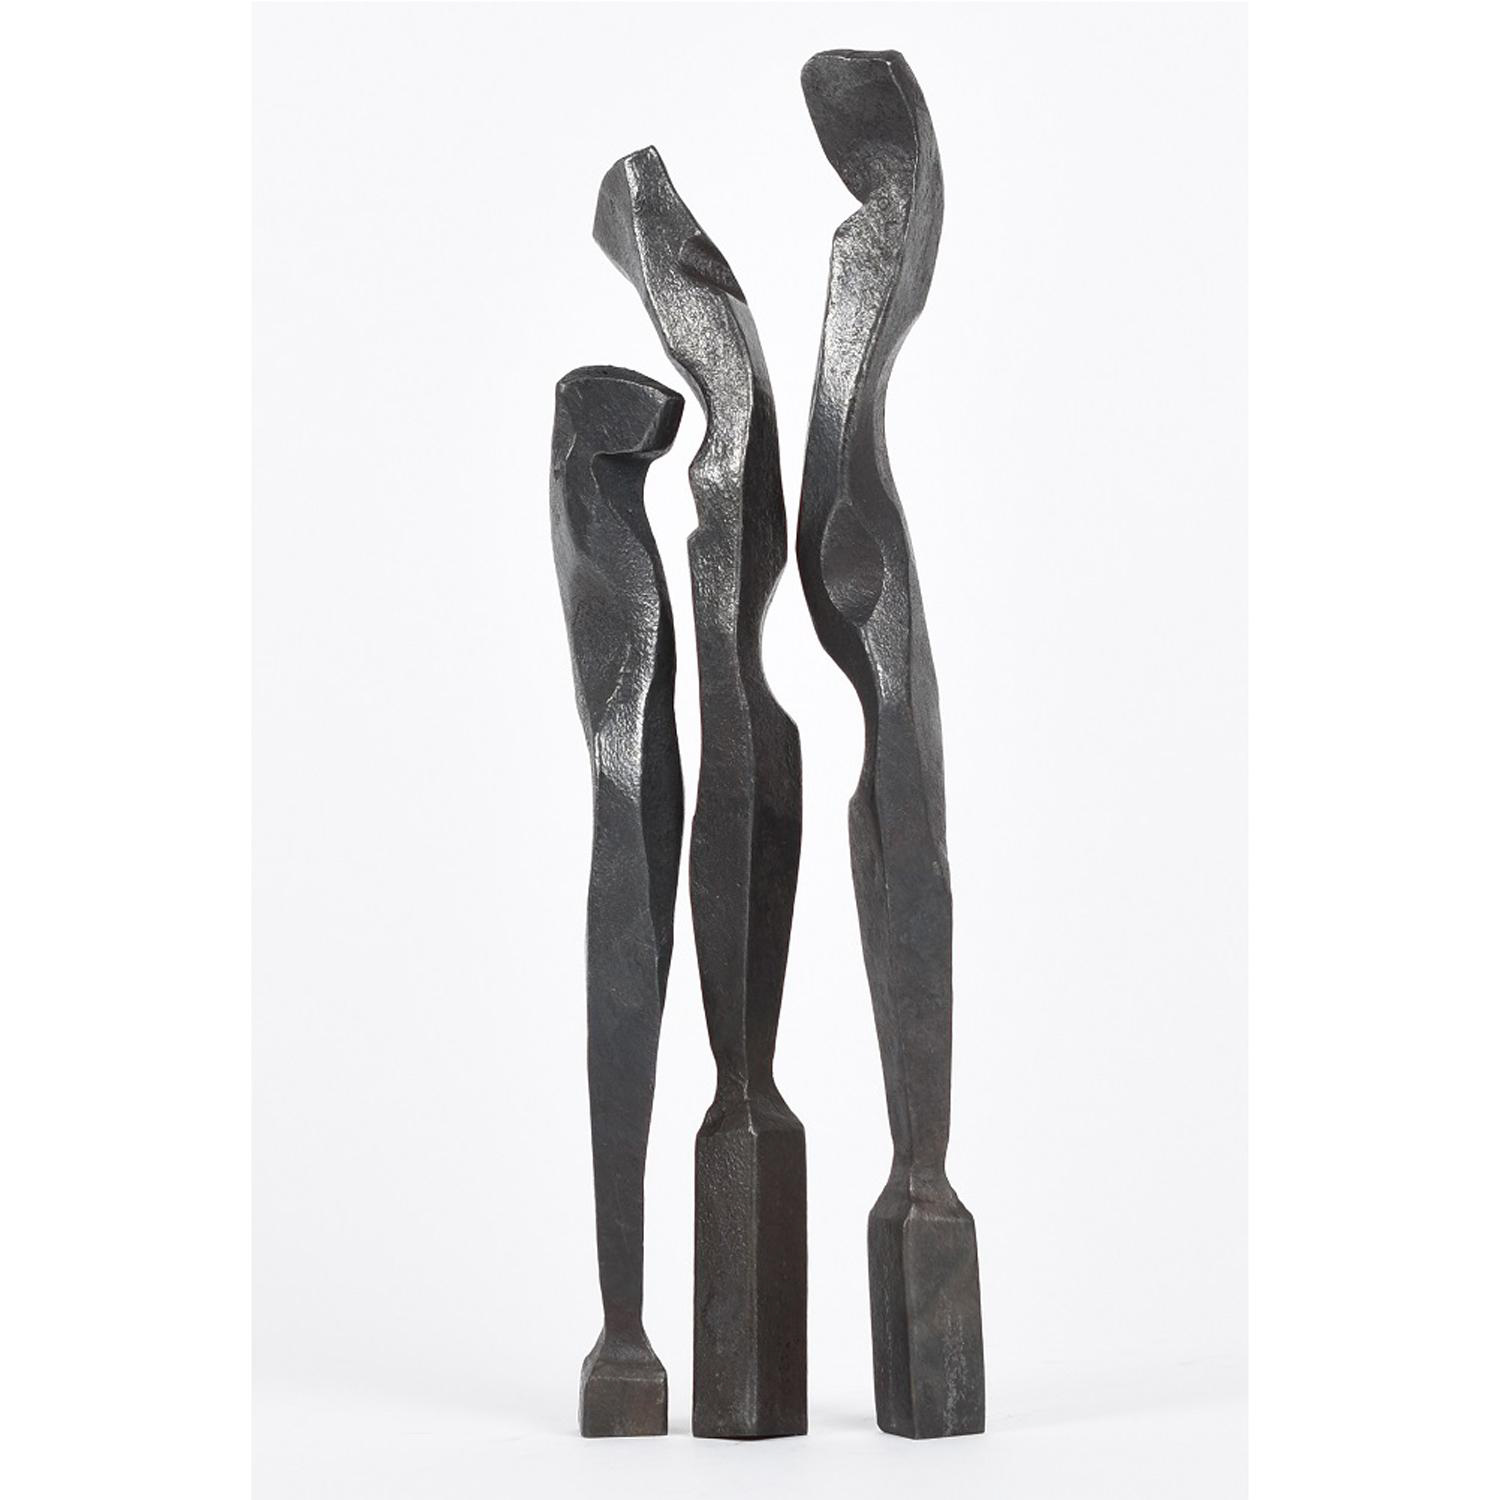 Three forged columns of steel, forged to evoke bodies seen against a white background; they seem to be in conversation, subtly interacting through gesture